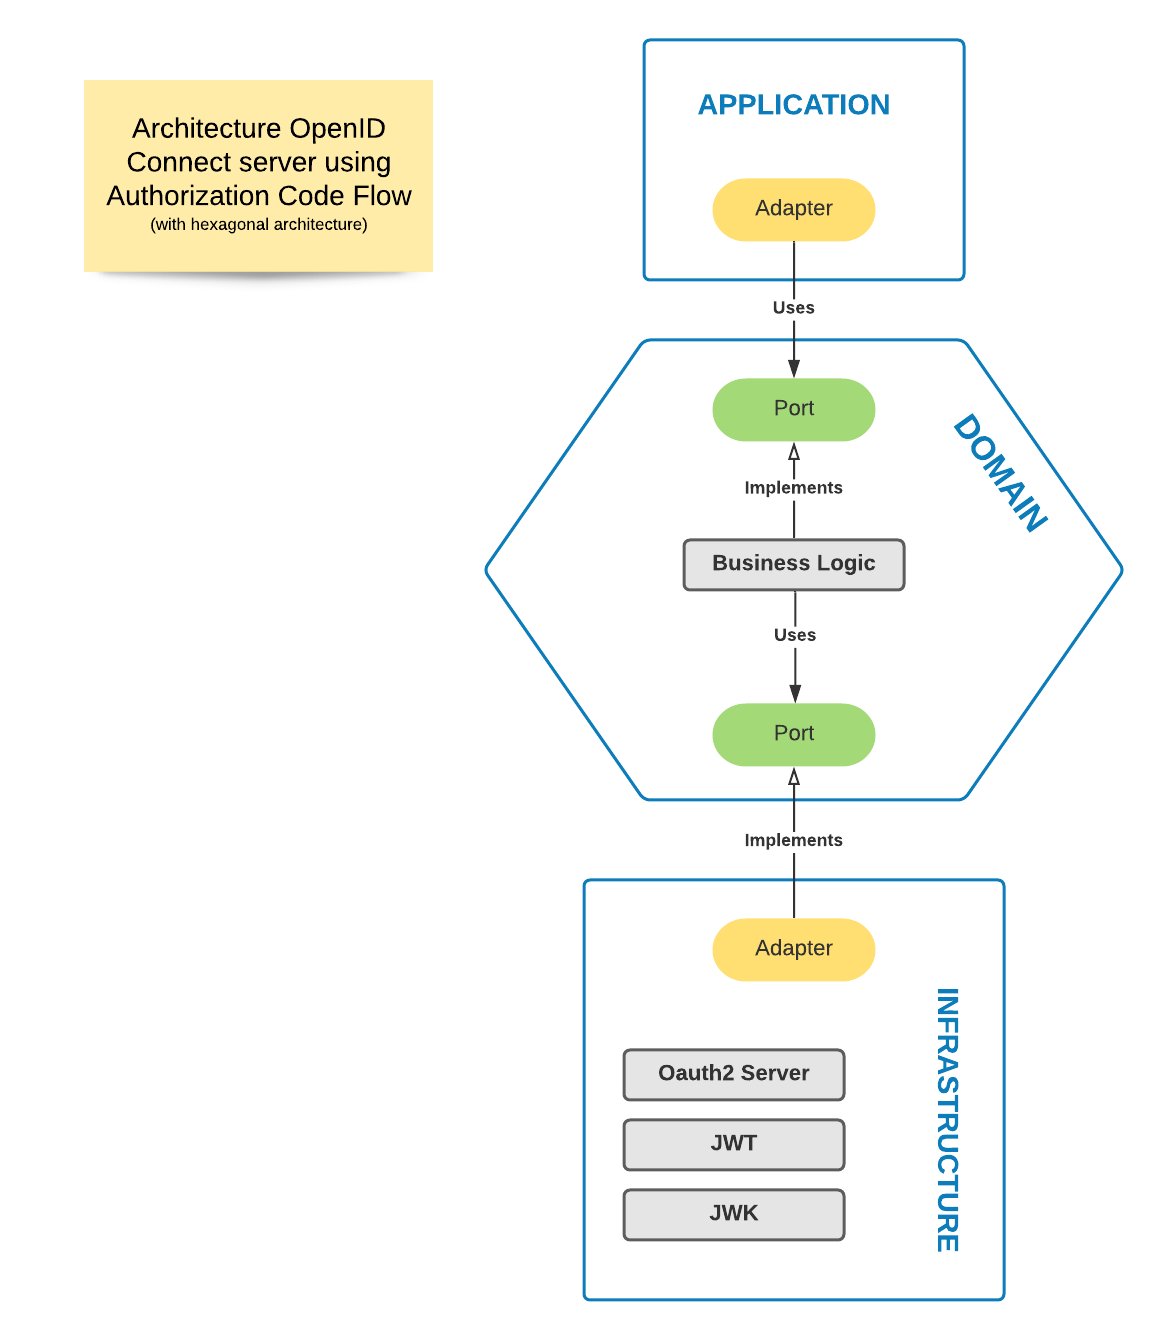 OpenID Connect Server with hexagonal architecture using Authorization Code Flow